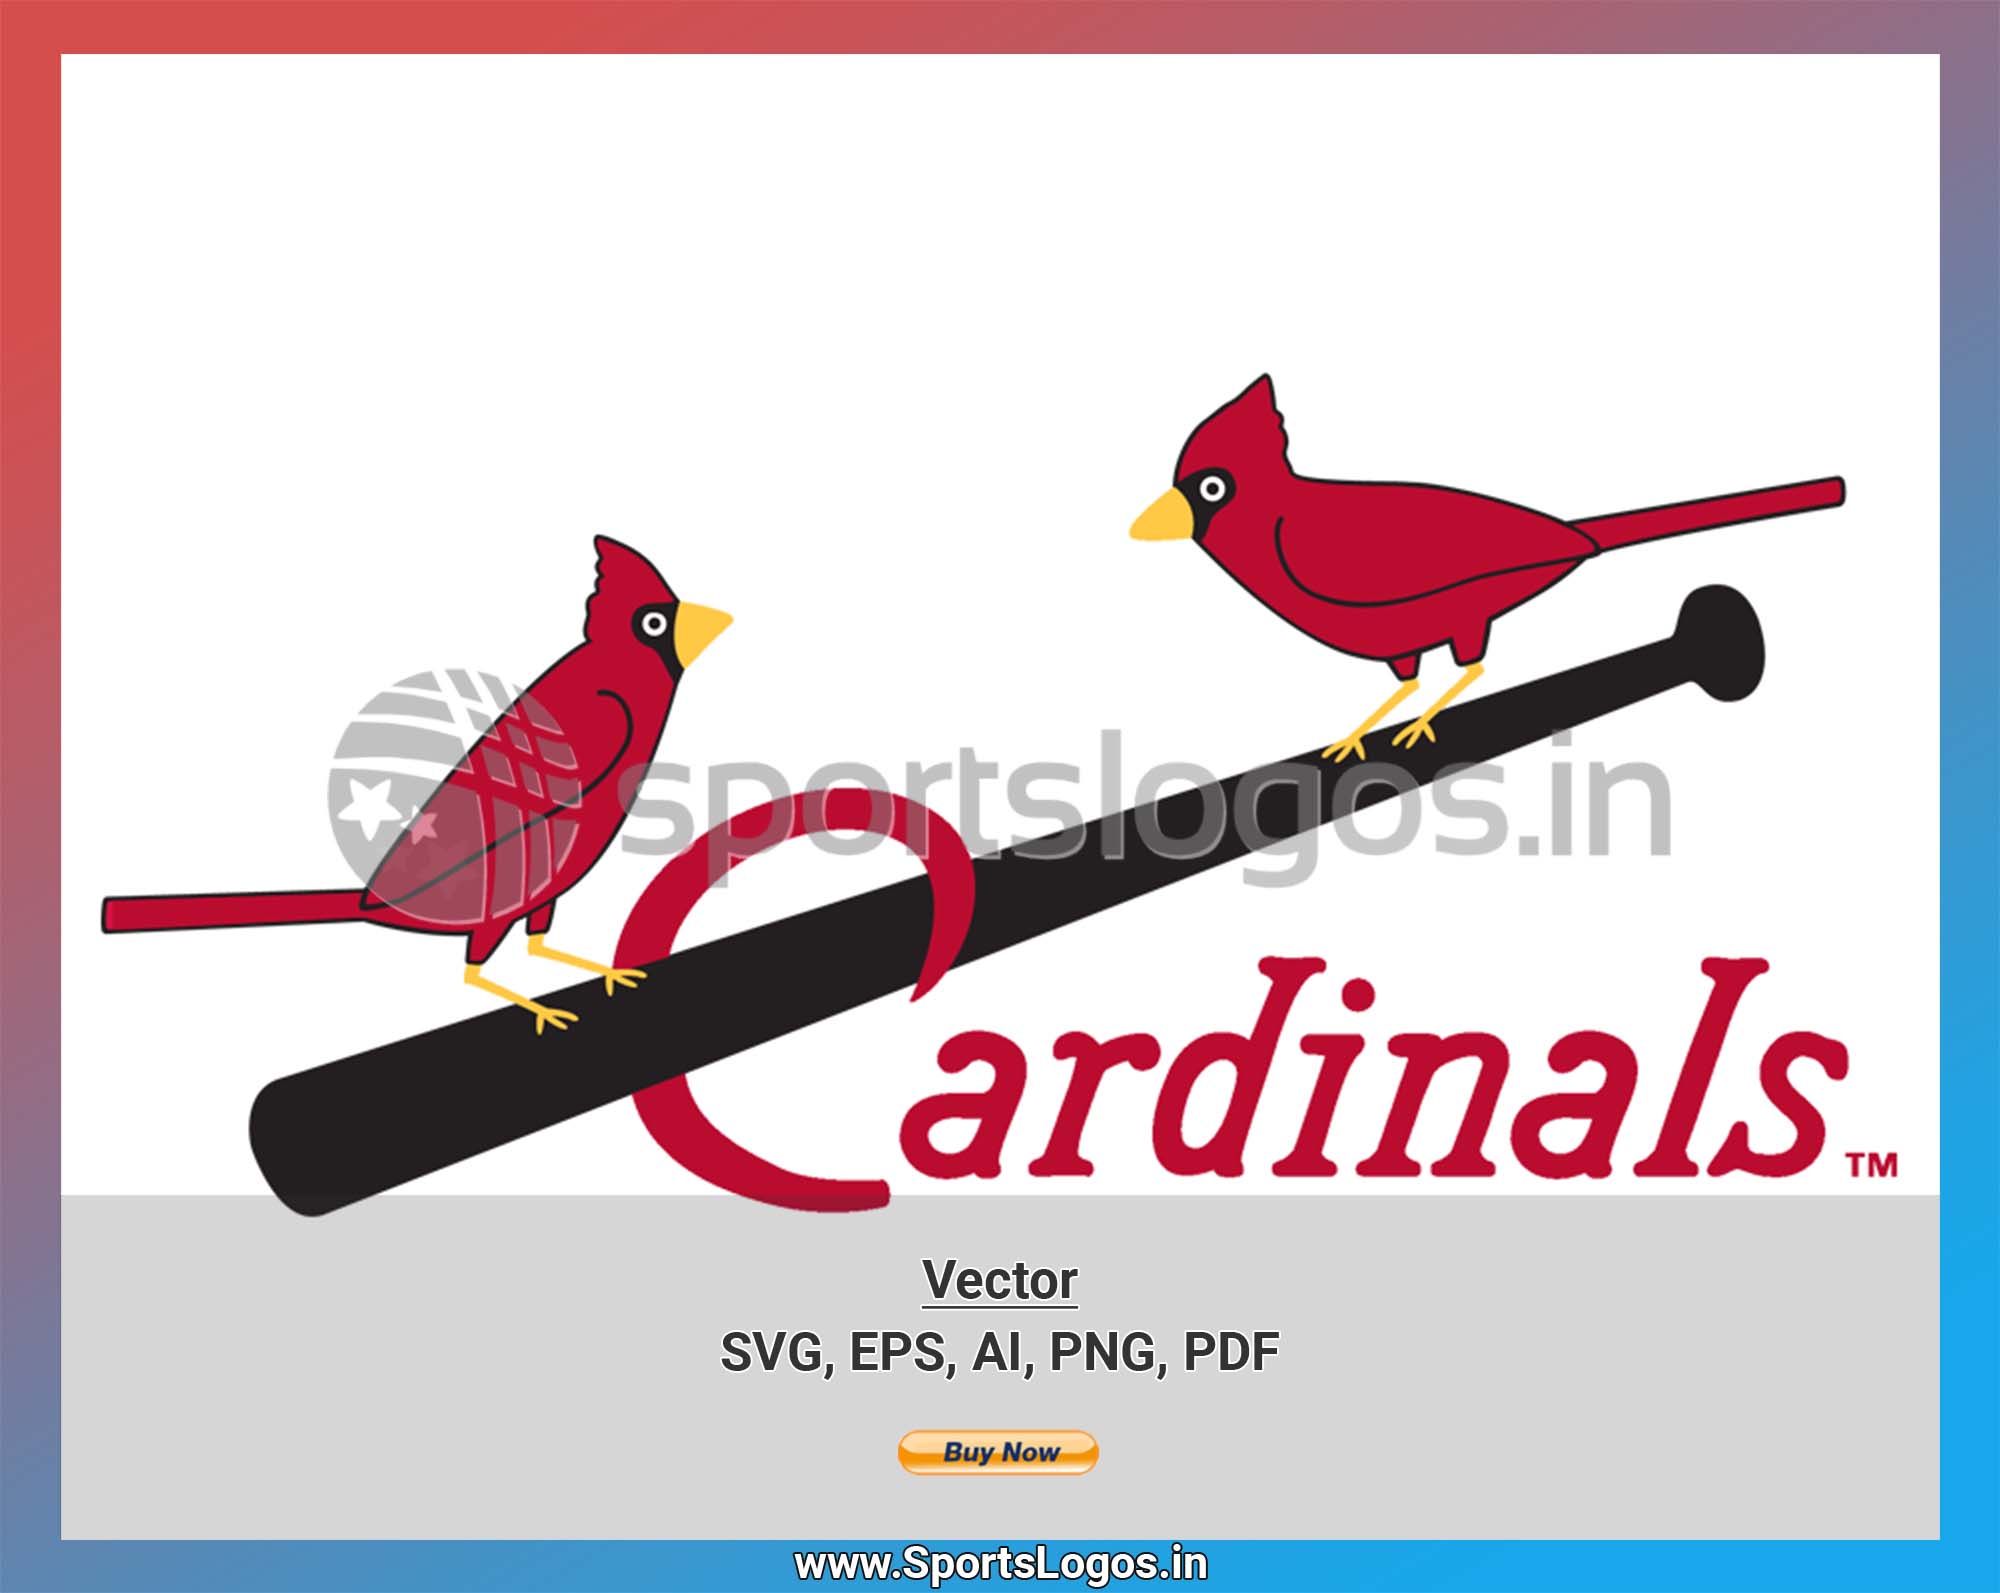 St. Louis Cardinals - Baseball Sports Vector SVG Logo in 5 formats -  SPLN004190 • Sports Logos - Embroidery & Vector for NFL, NBA, NHL, MLB,  MiLB, and more!